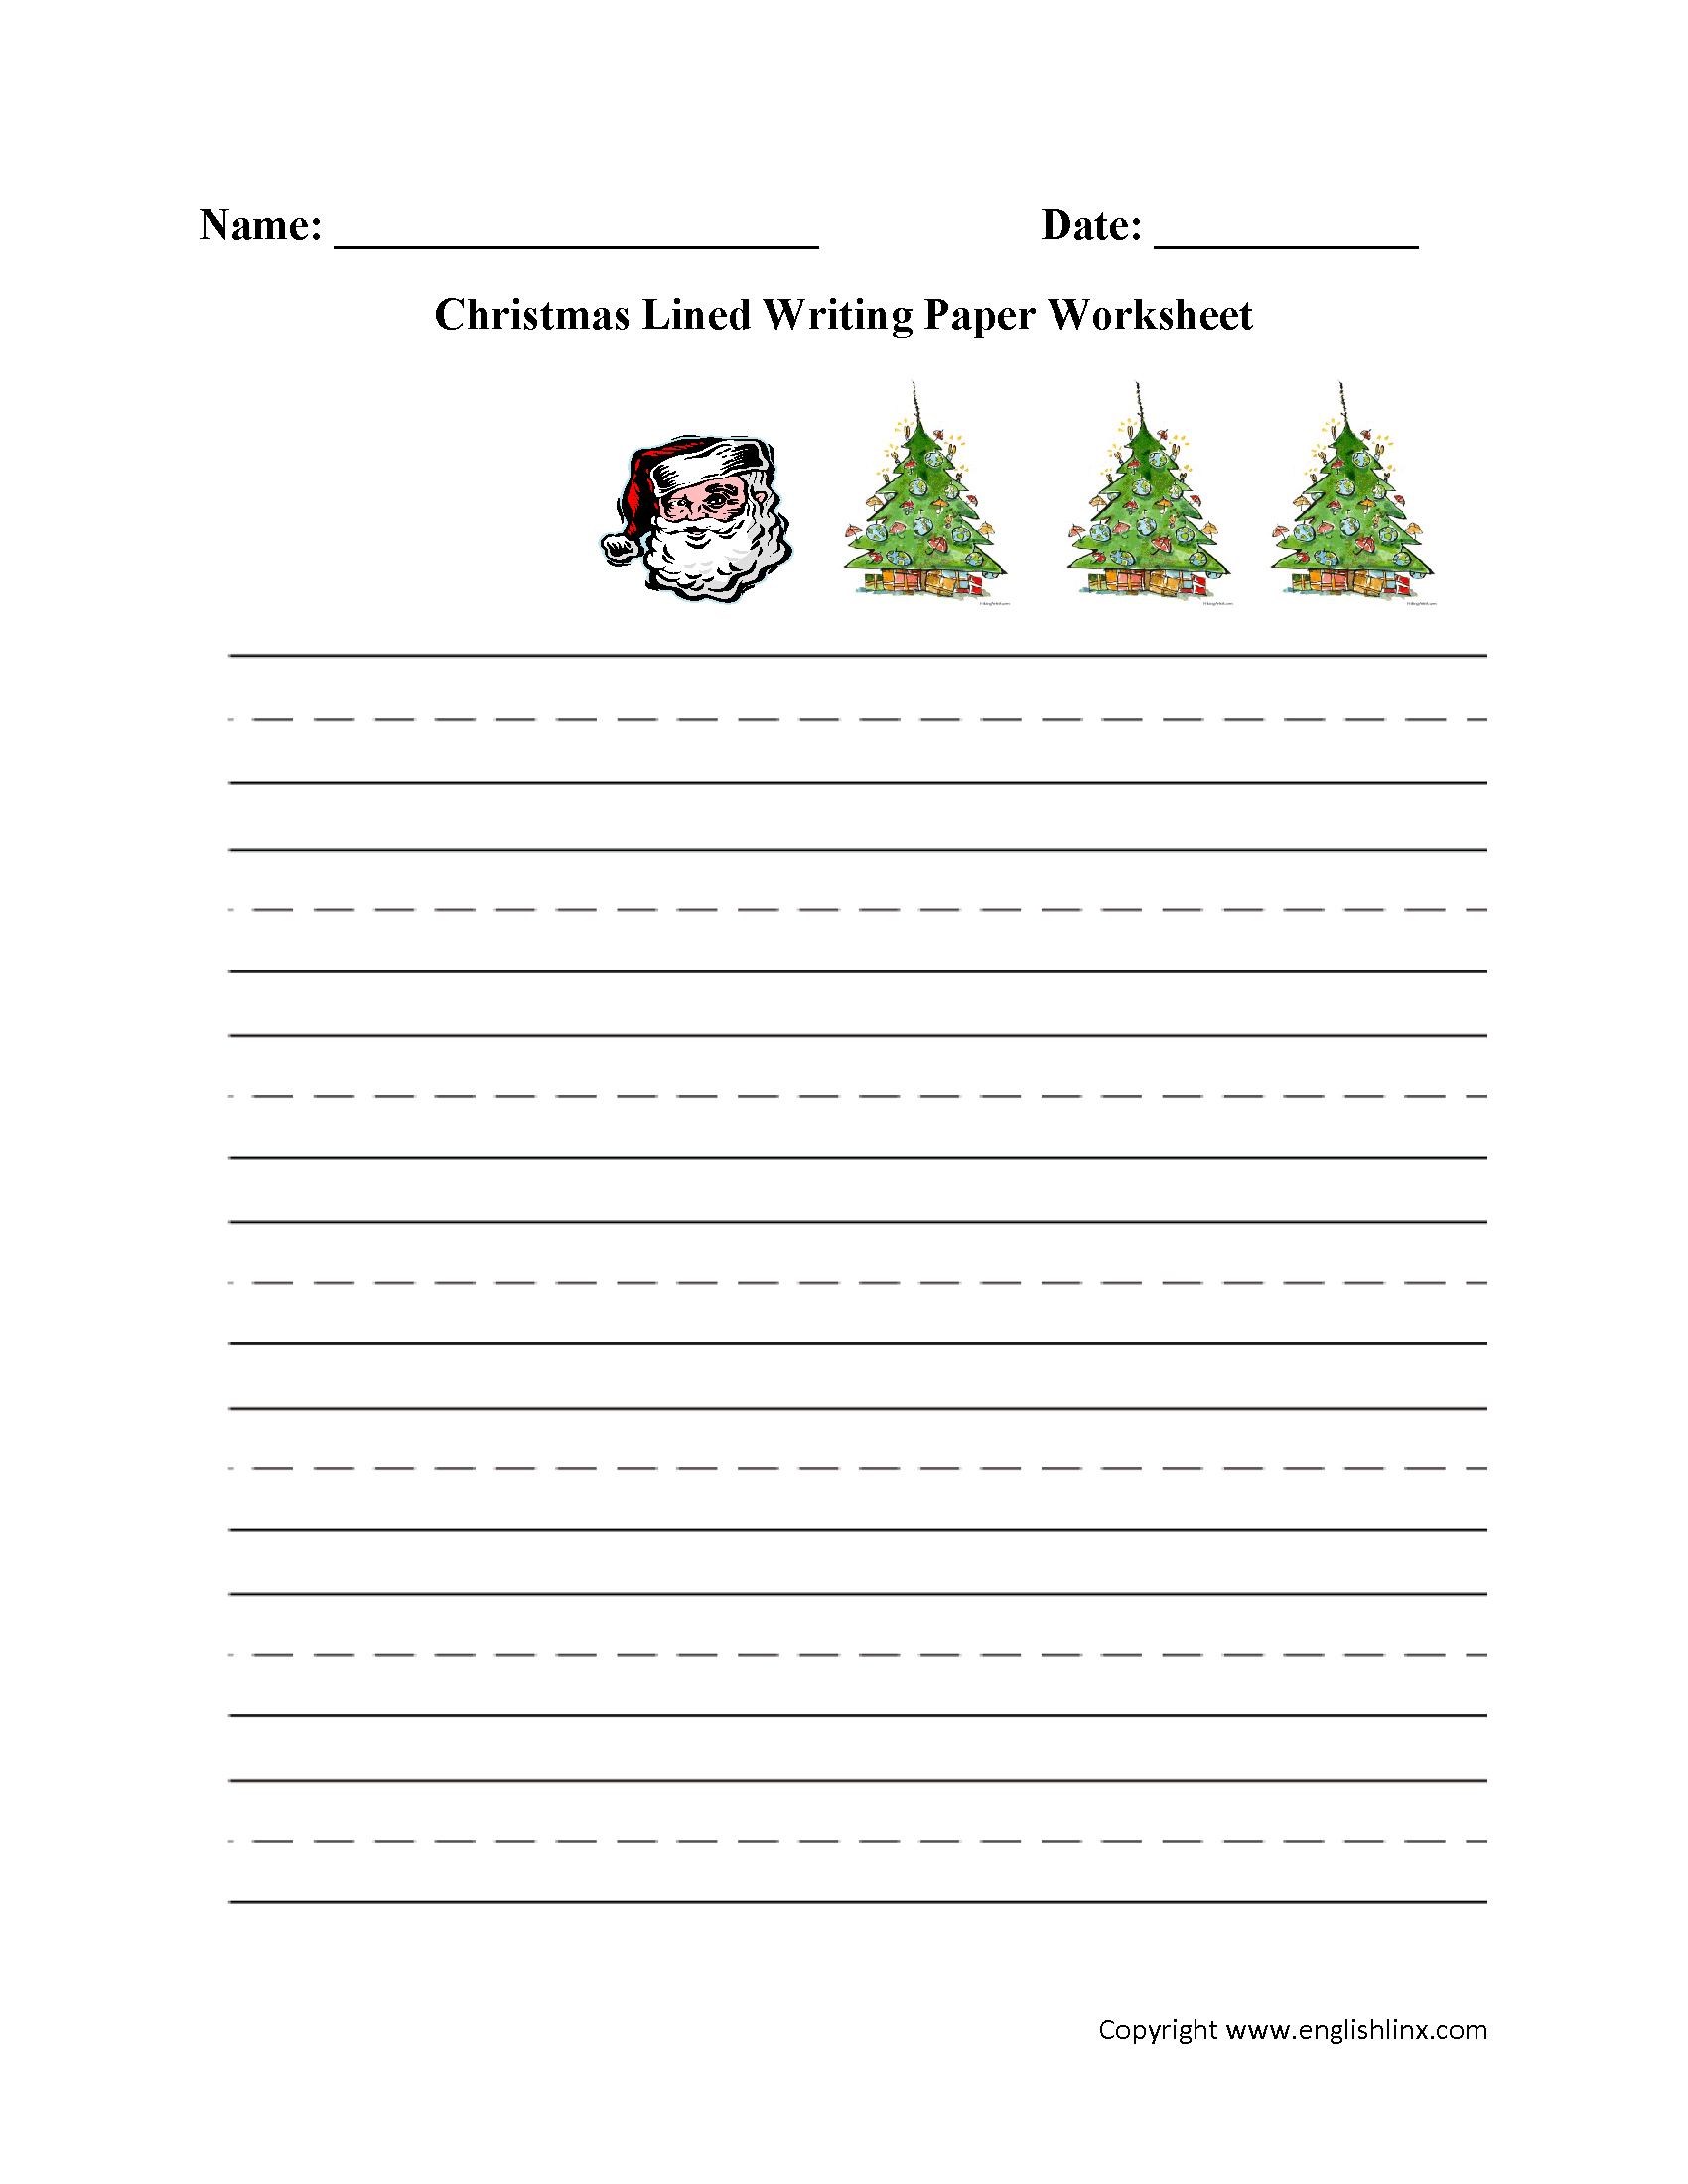 Writing Worksheets  Lined Writing Paper Worksheets For Christmas Handwriting Worksheets